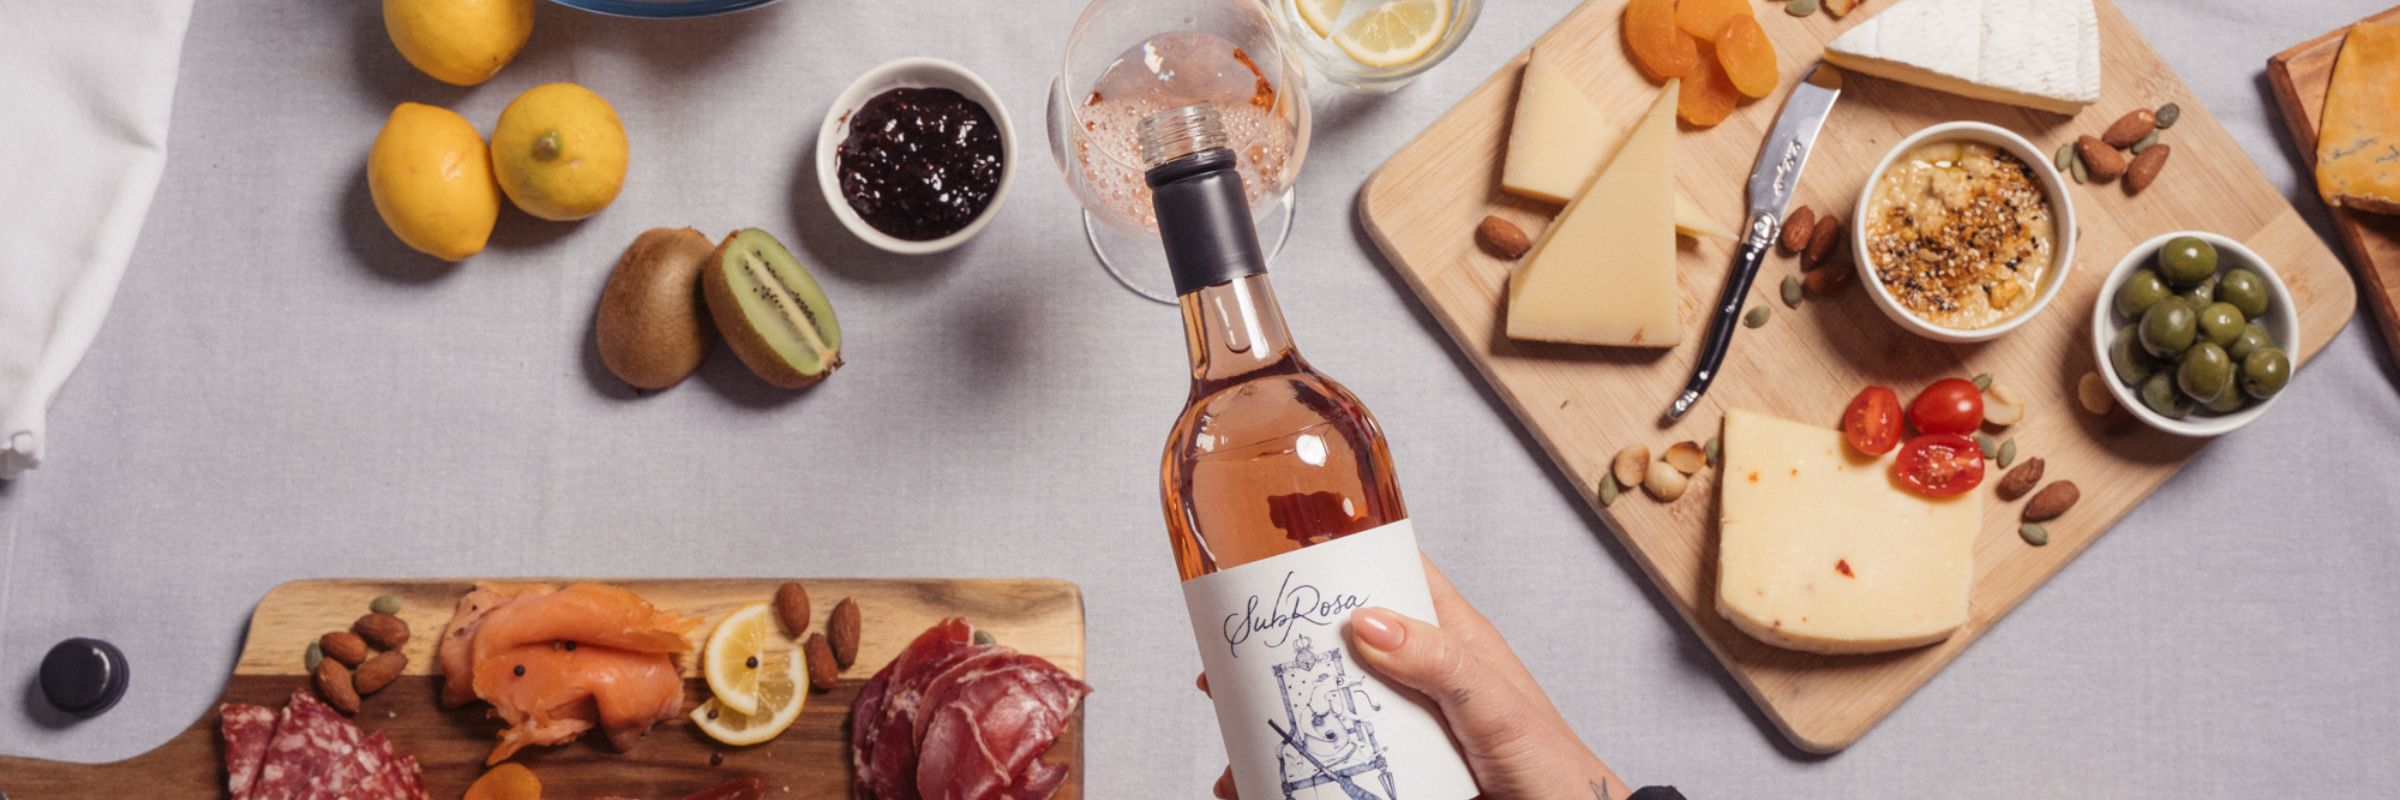 subrosa rose wine being poured into a glass with a charcuterie board in the background